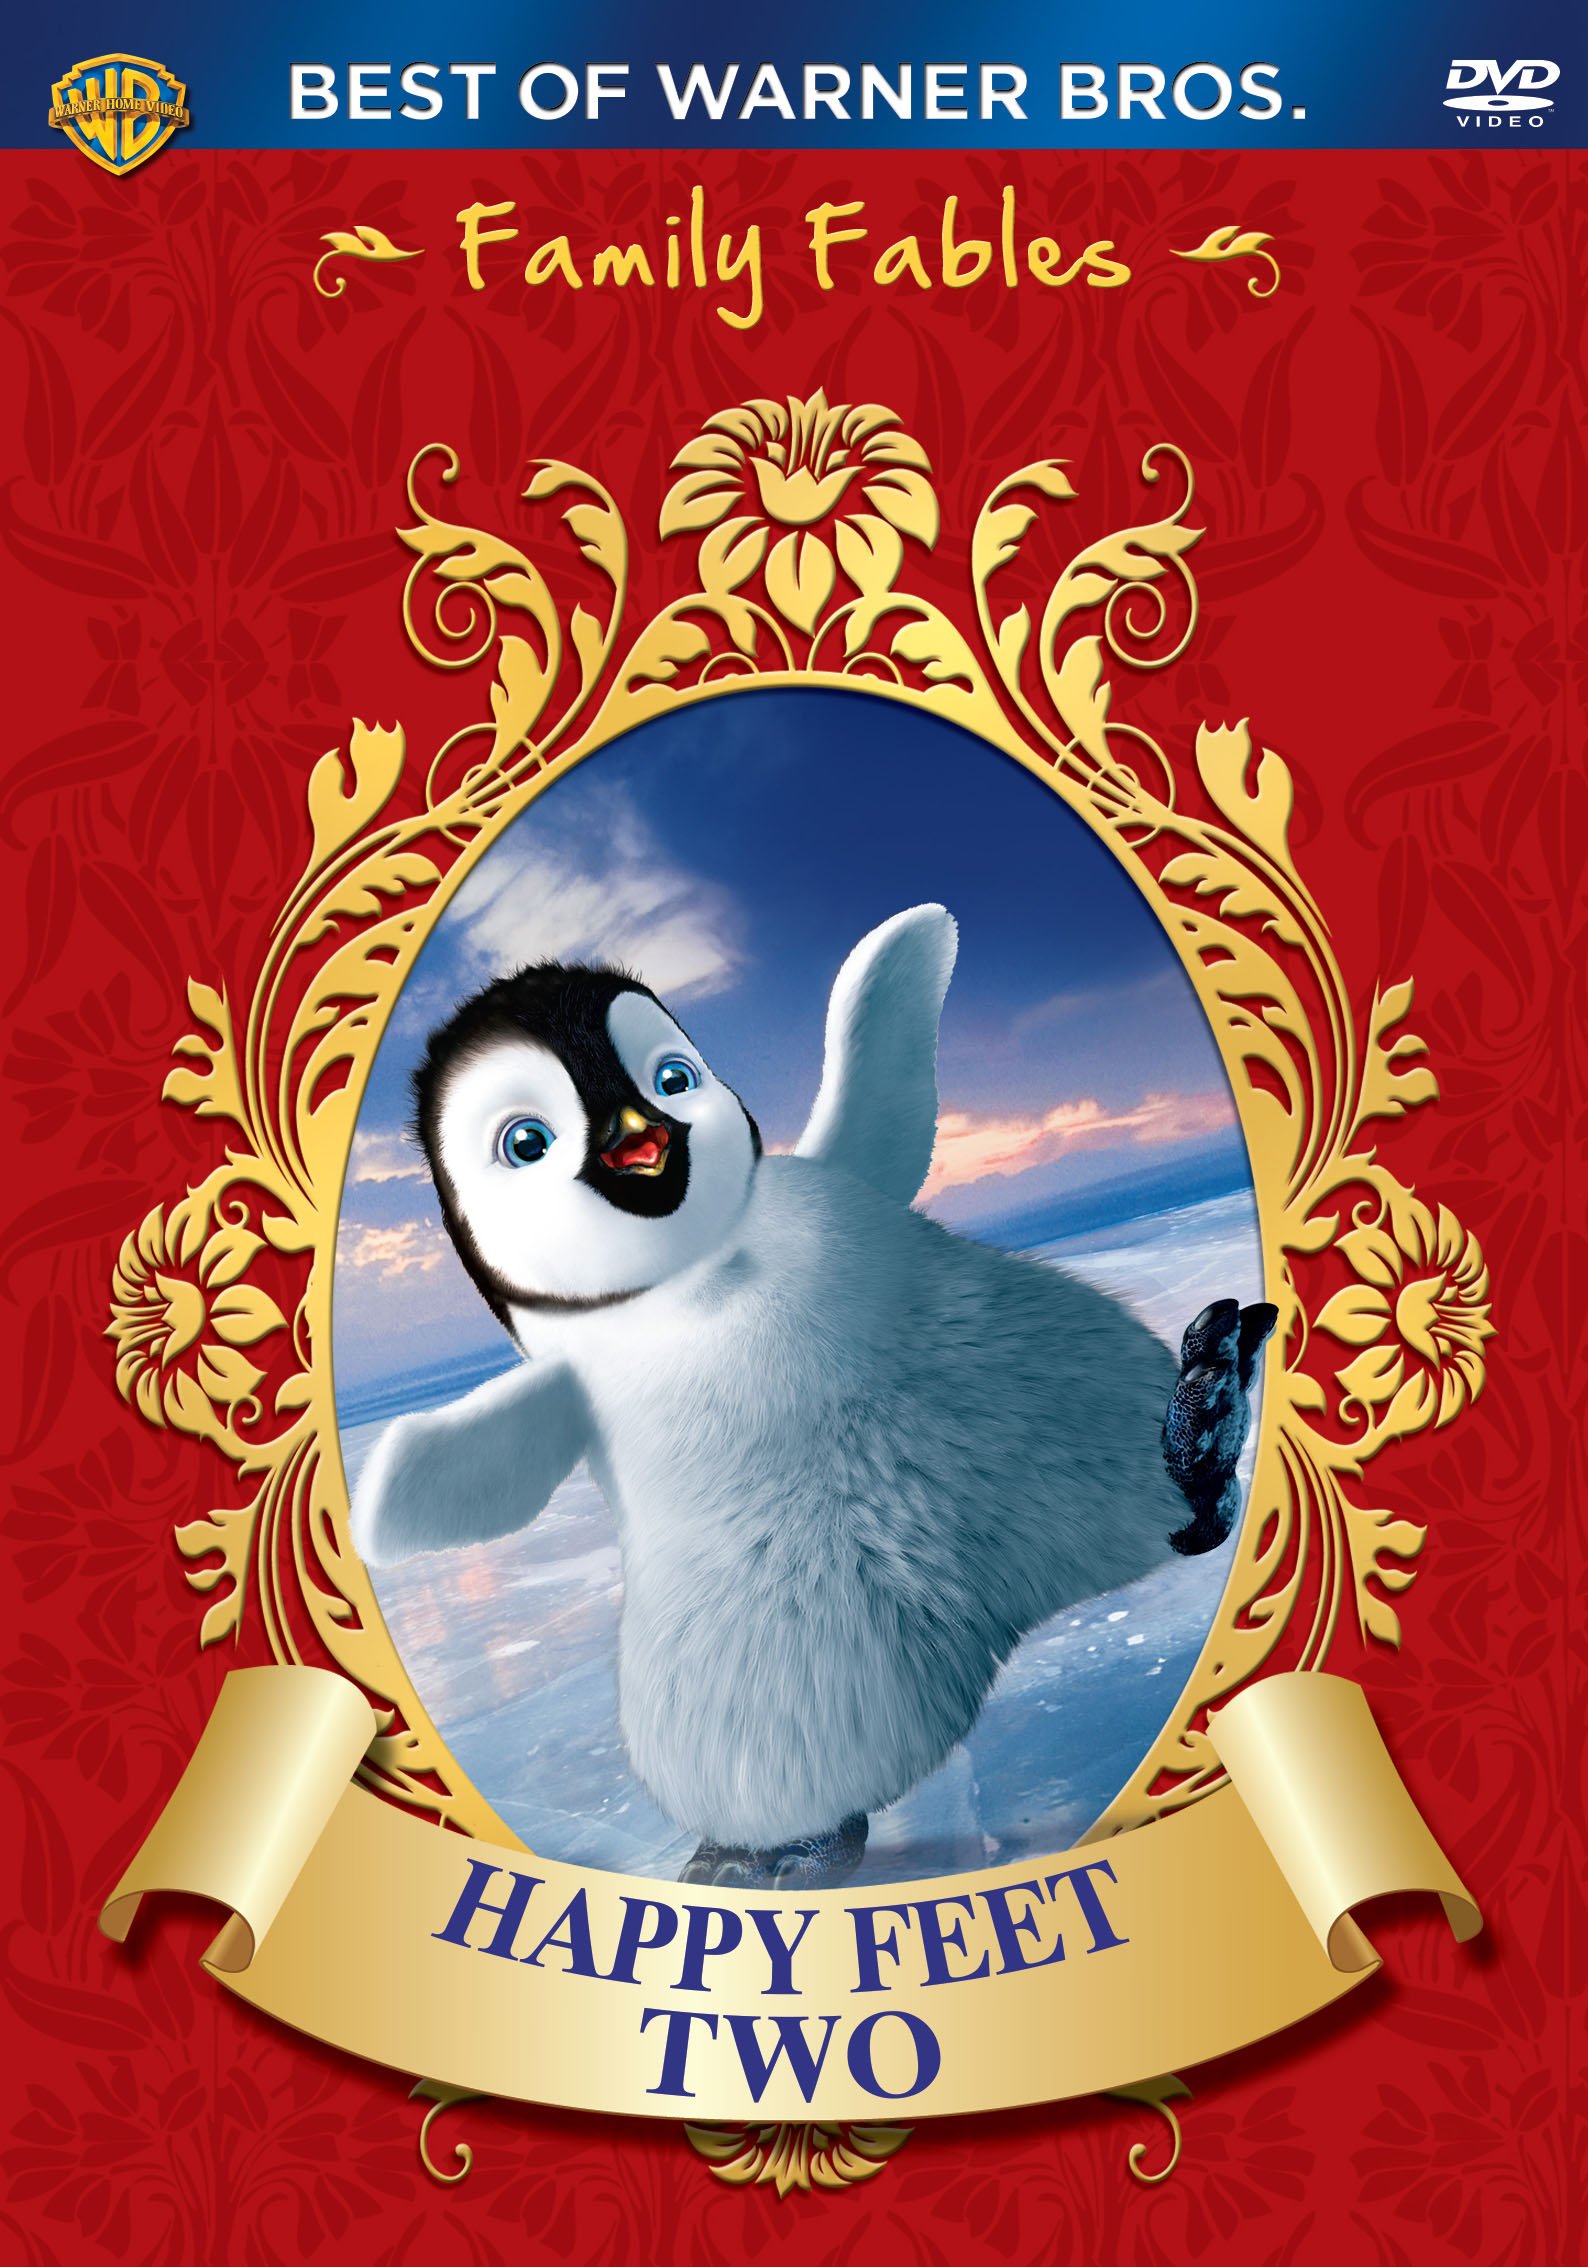 family-fables-happy-feet-2-movie-purchase-or-watch-online